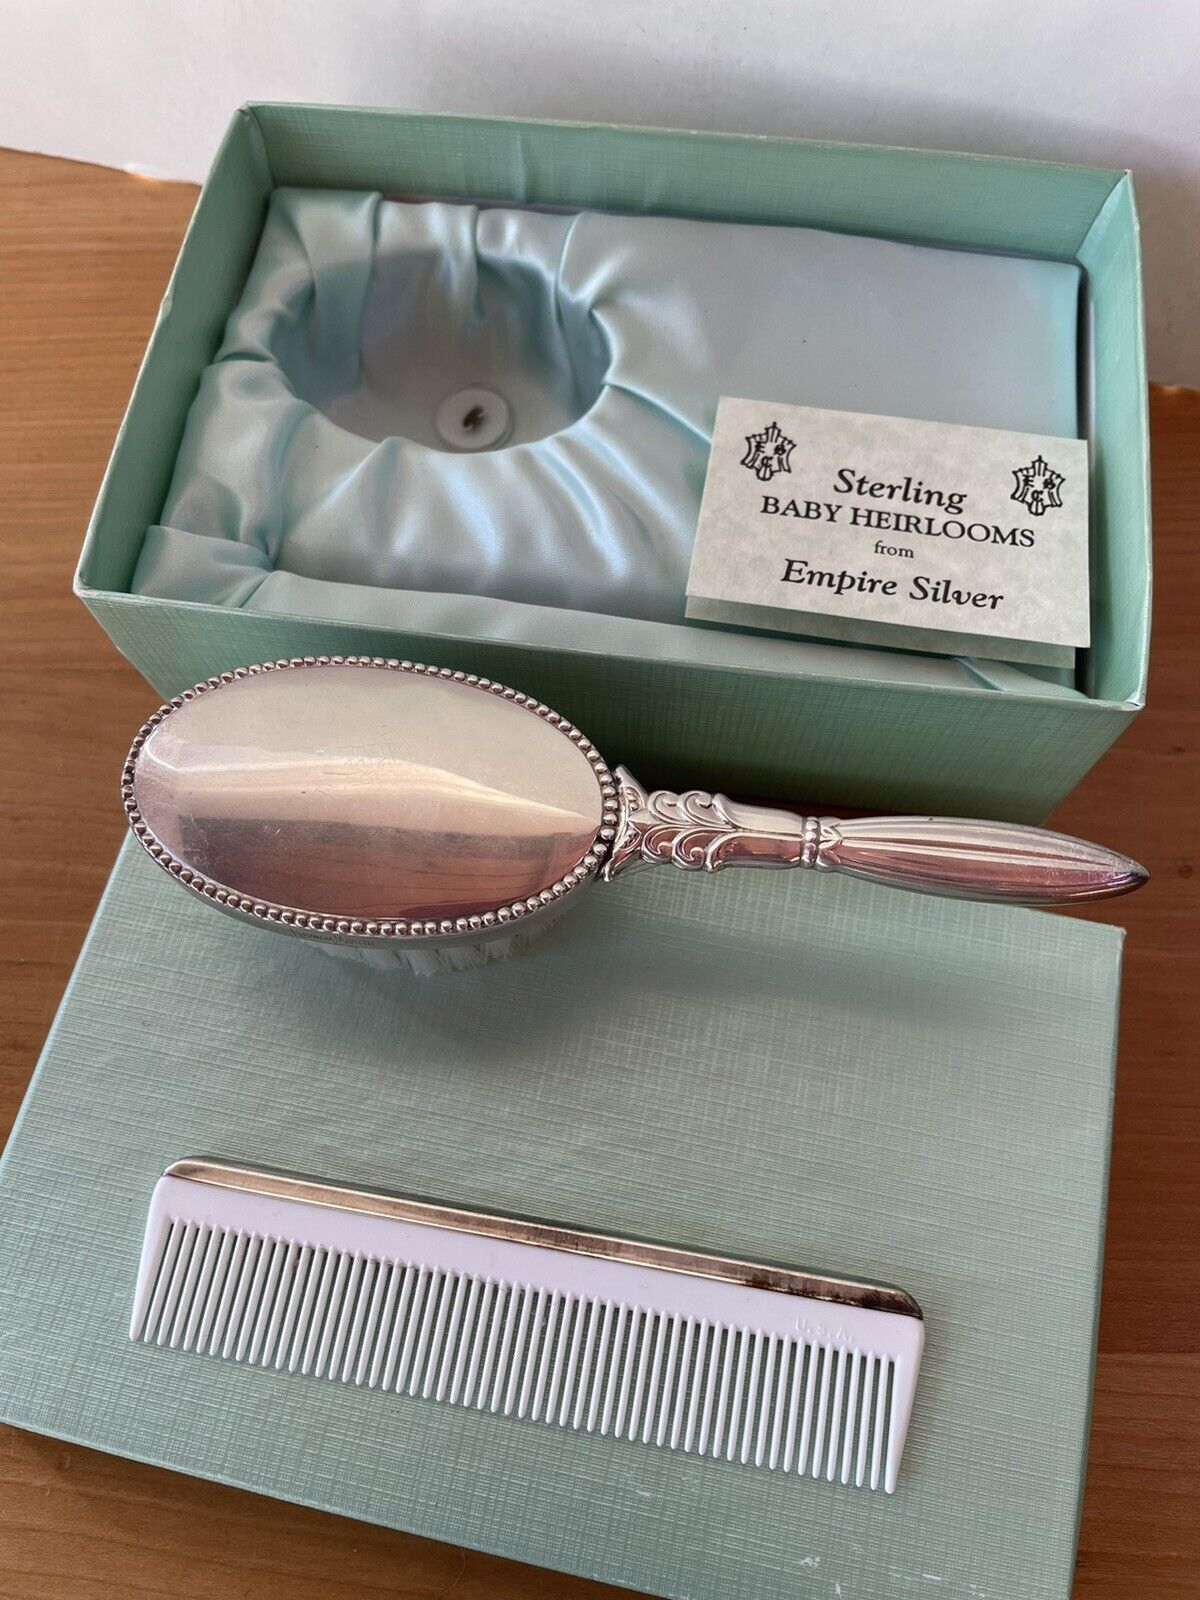 Vintage Empire Silver Baby Heirlooms Sterling Comb & Brush Set By Neiman Marcus